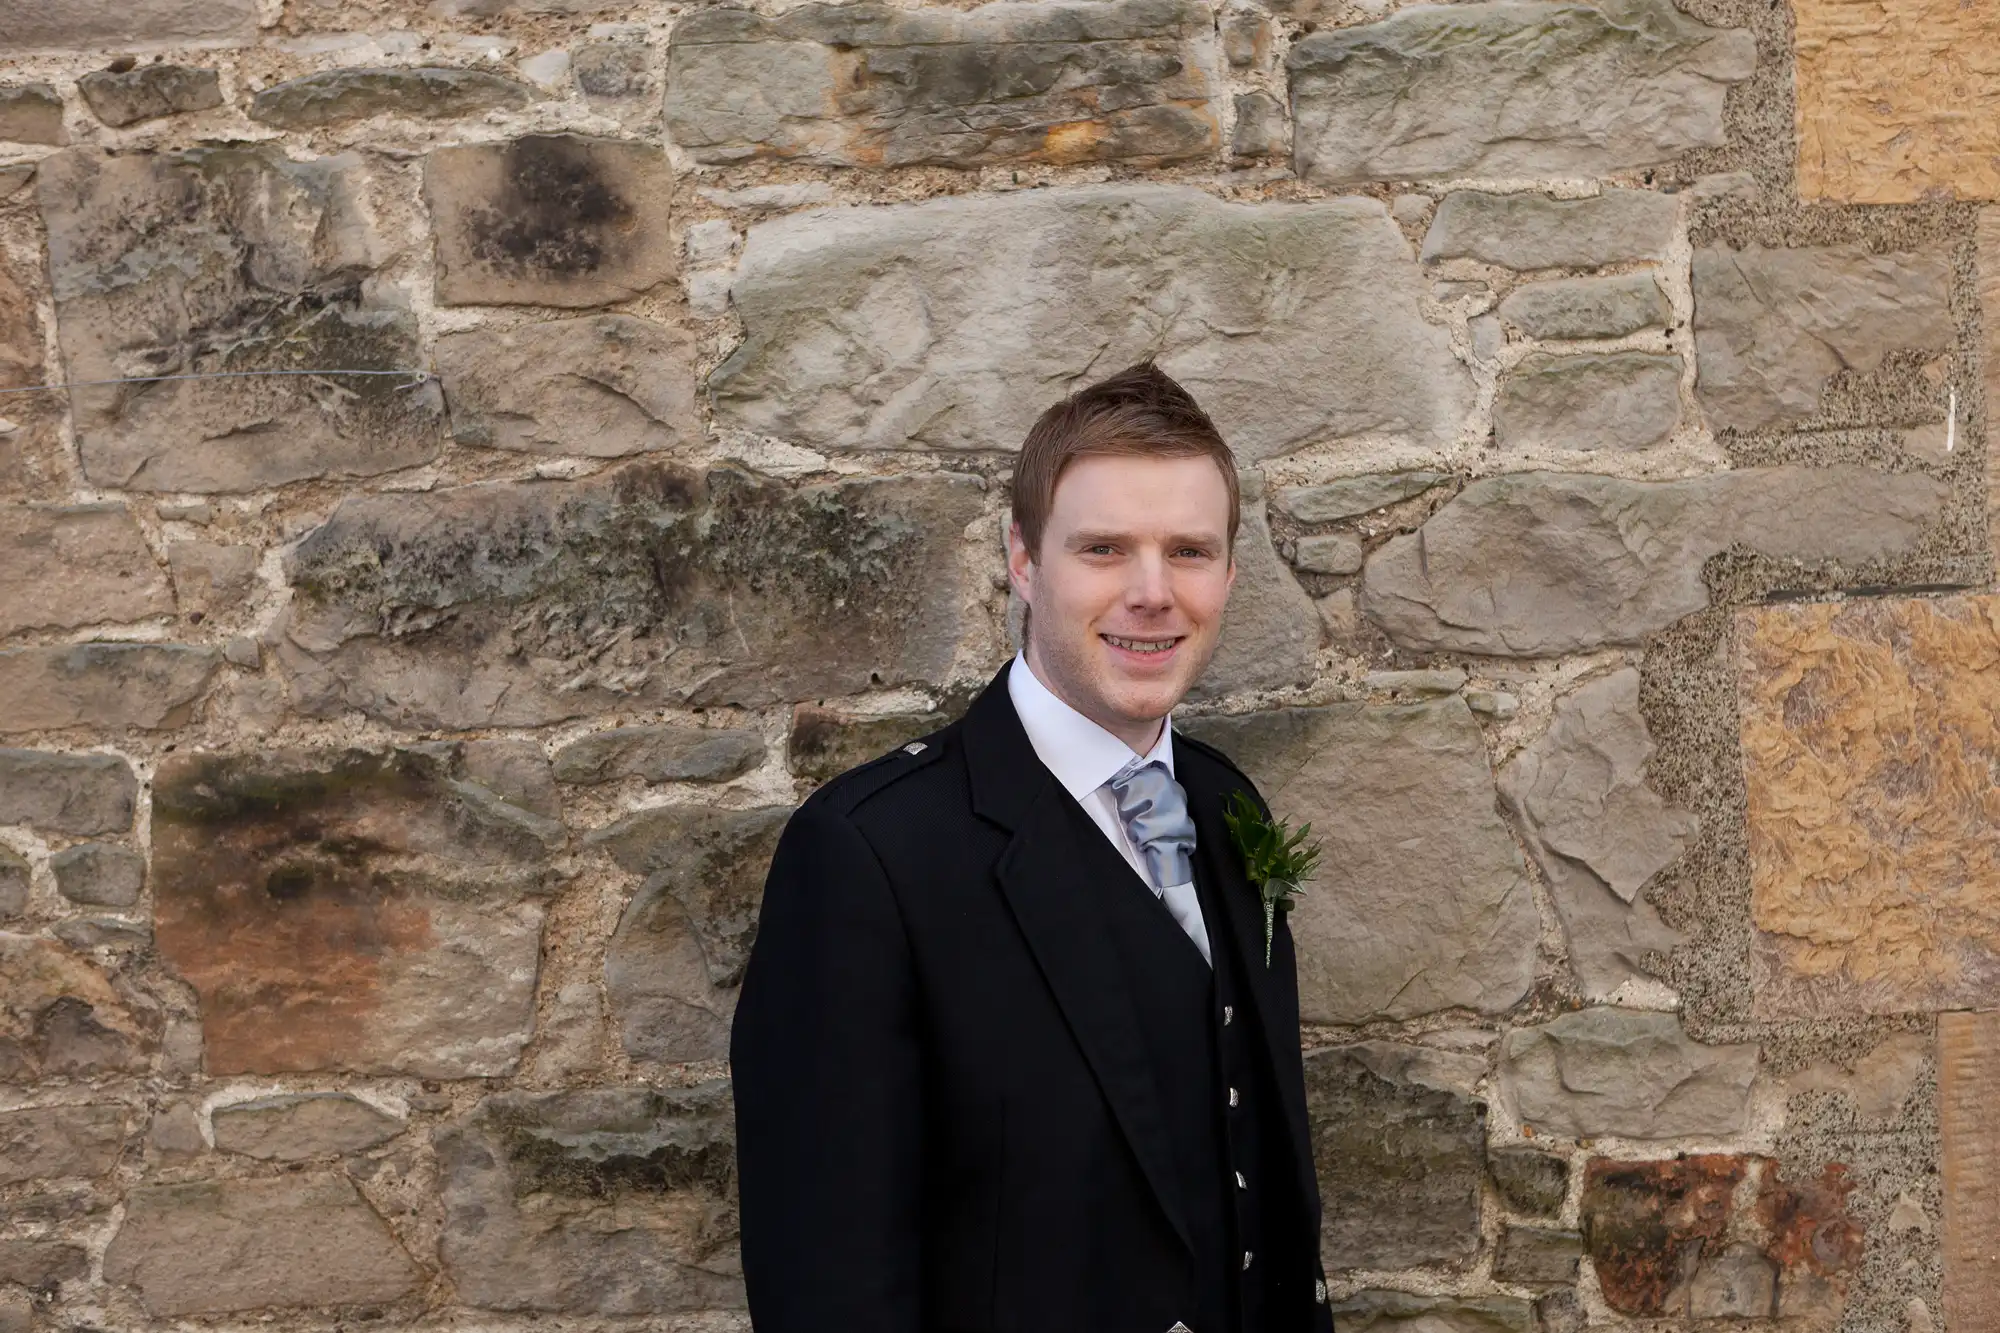 A young man in a black suit and tie smiling in front of a textured stone wall.